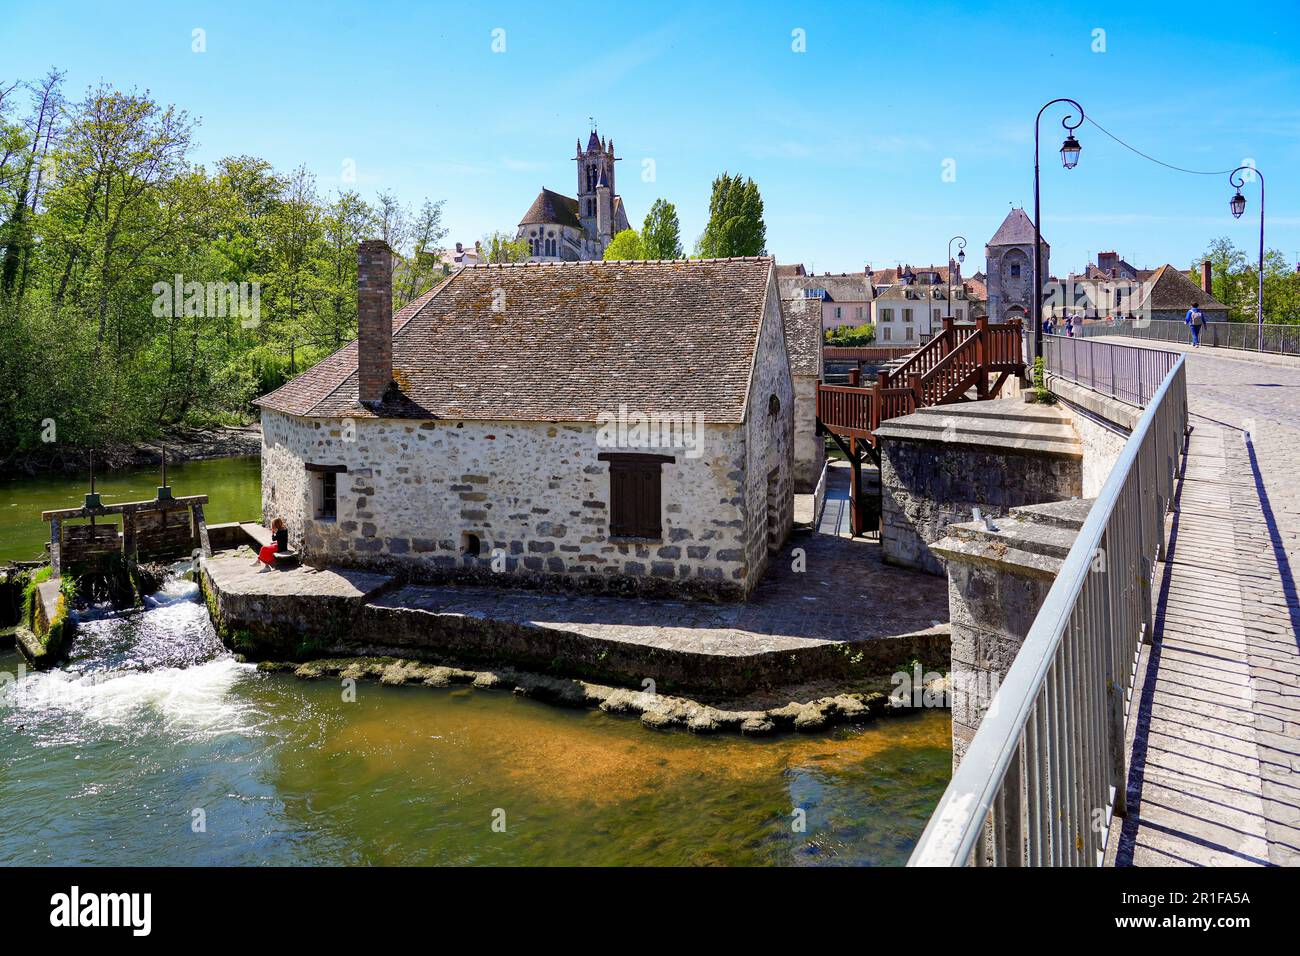 Water mill built on a dam over the river Loing in the medieval town of Moret-sur-Loing in Seine et Marne, France Stock Photo